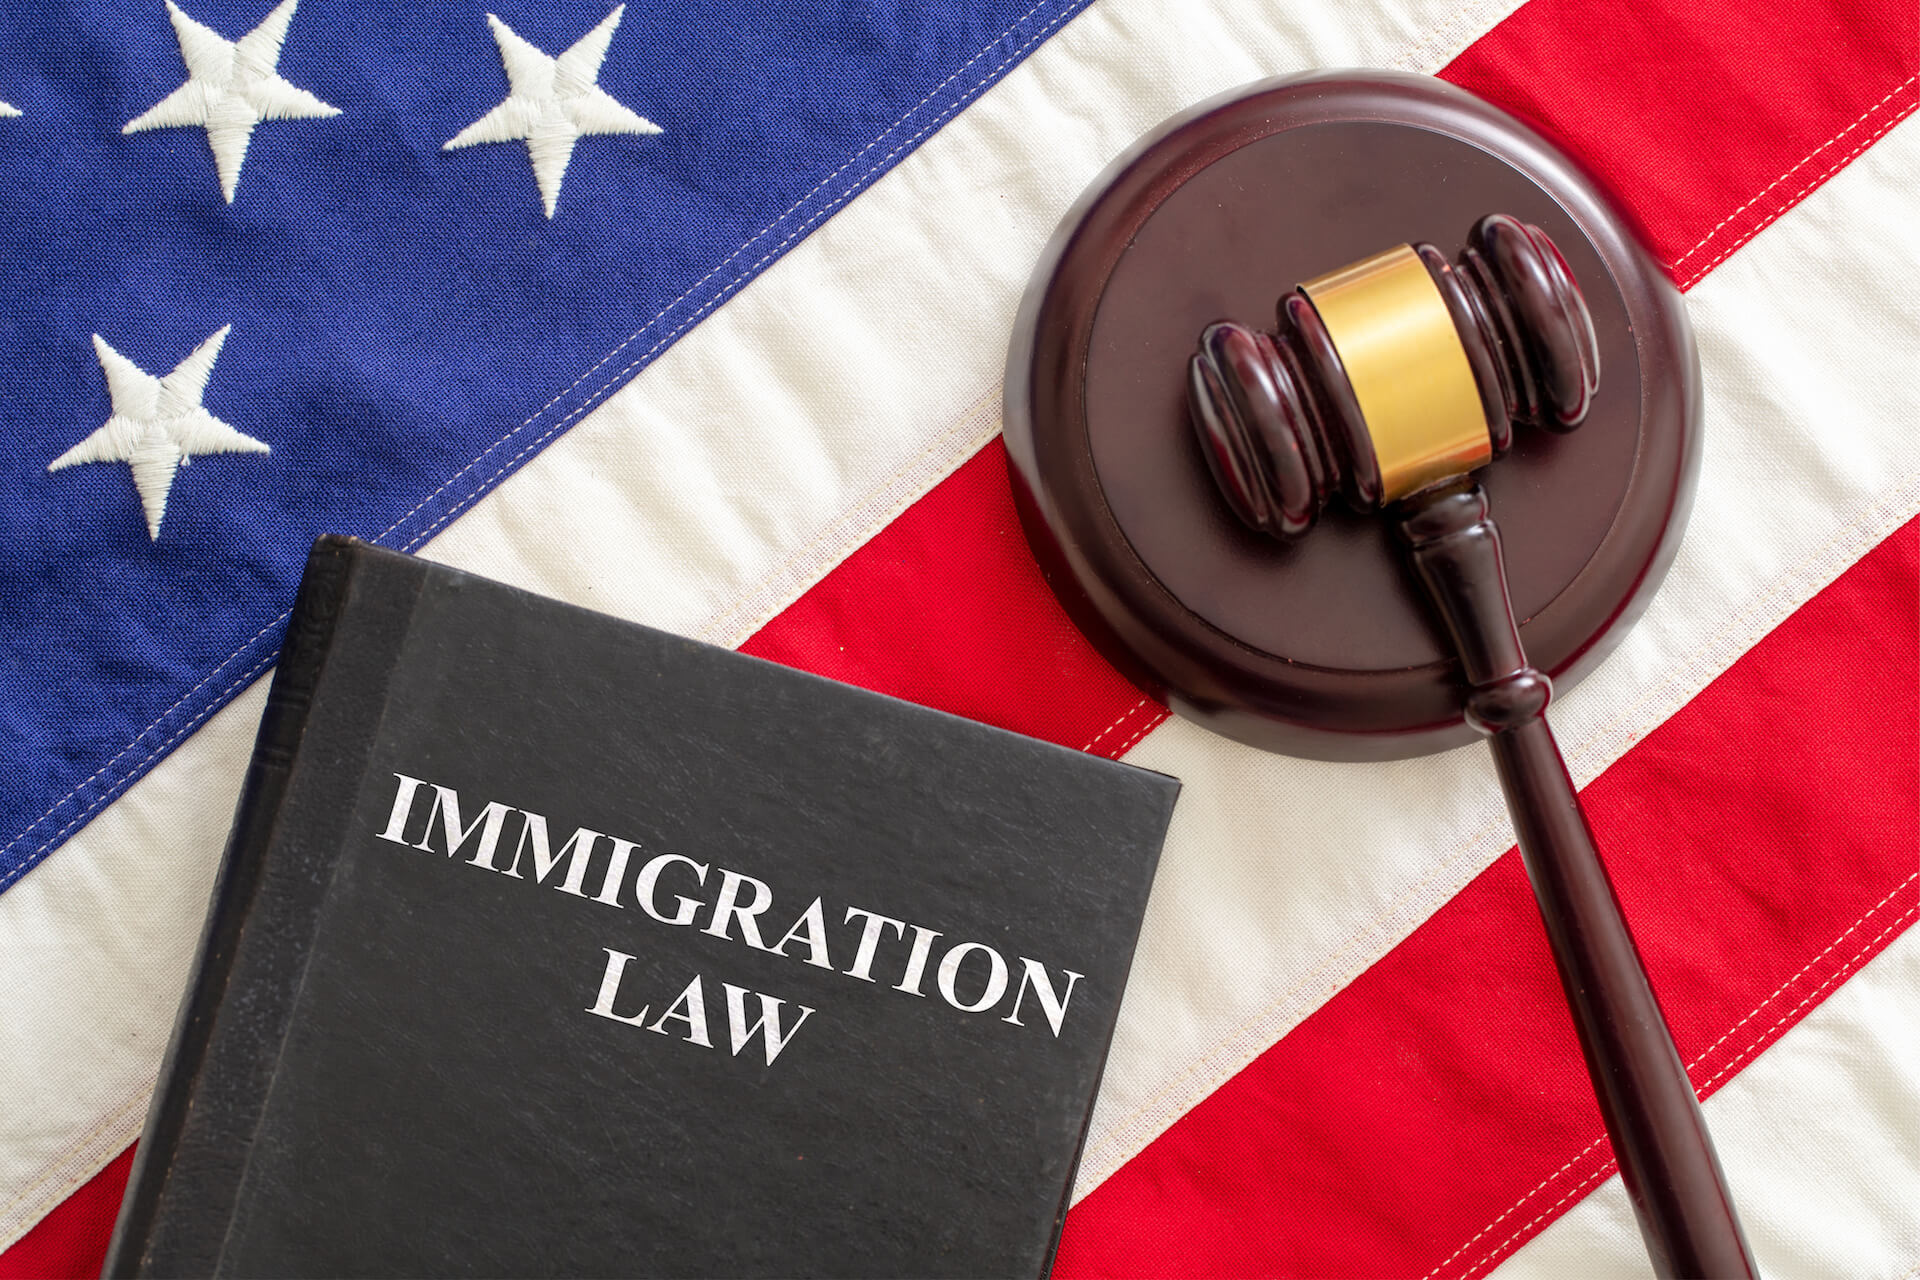 judge gavel and immigration law book on united sta 2021 08 28 12 04 06 utc1